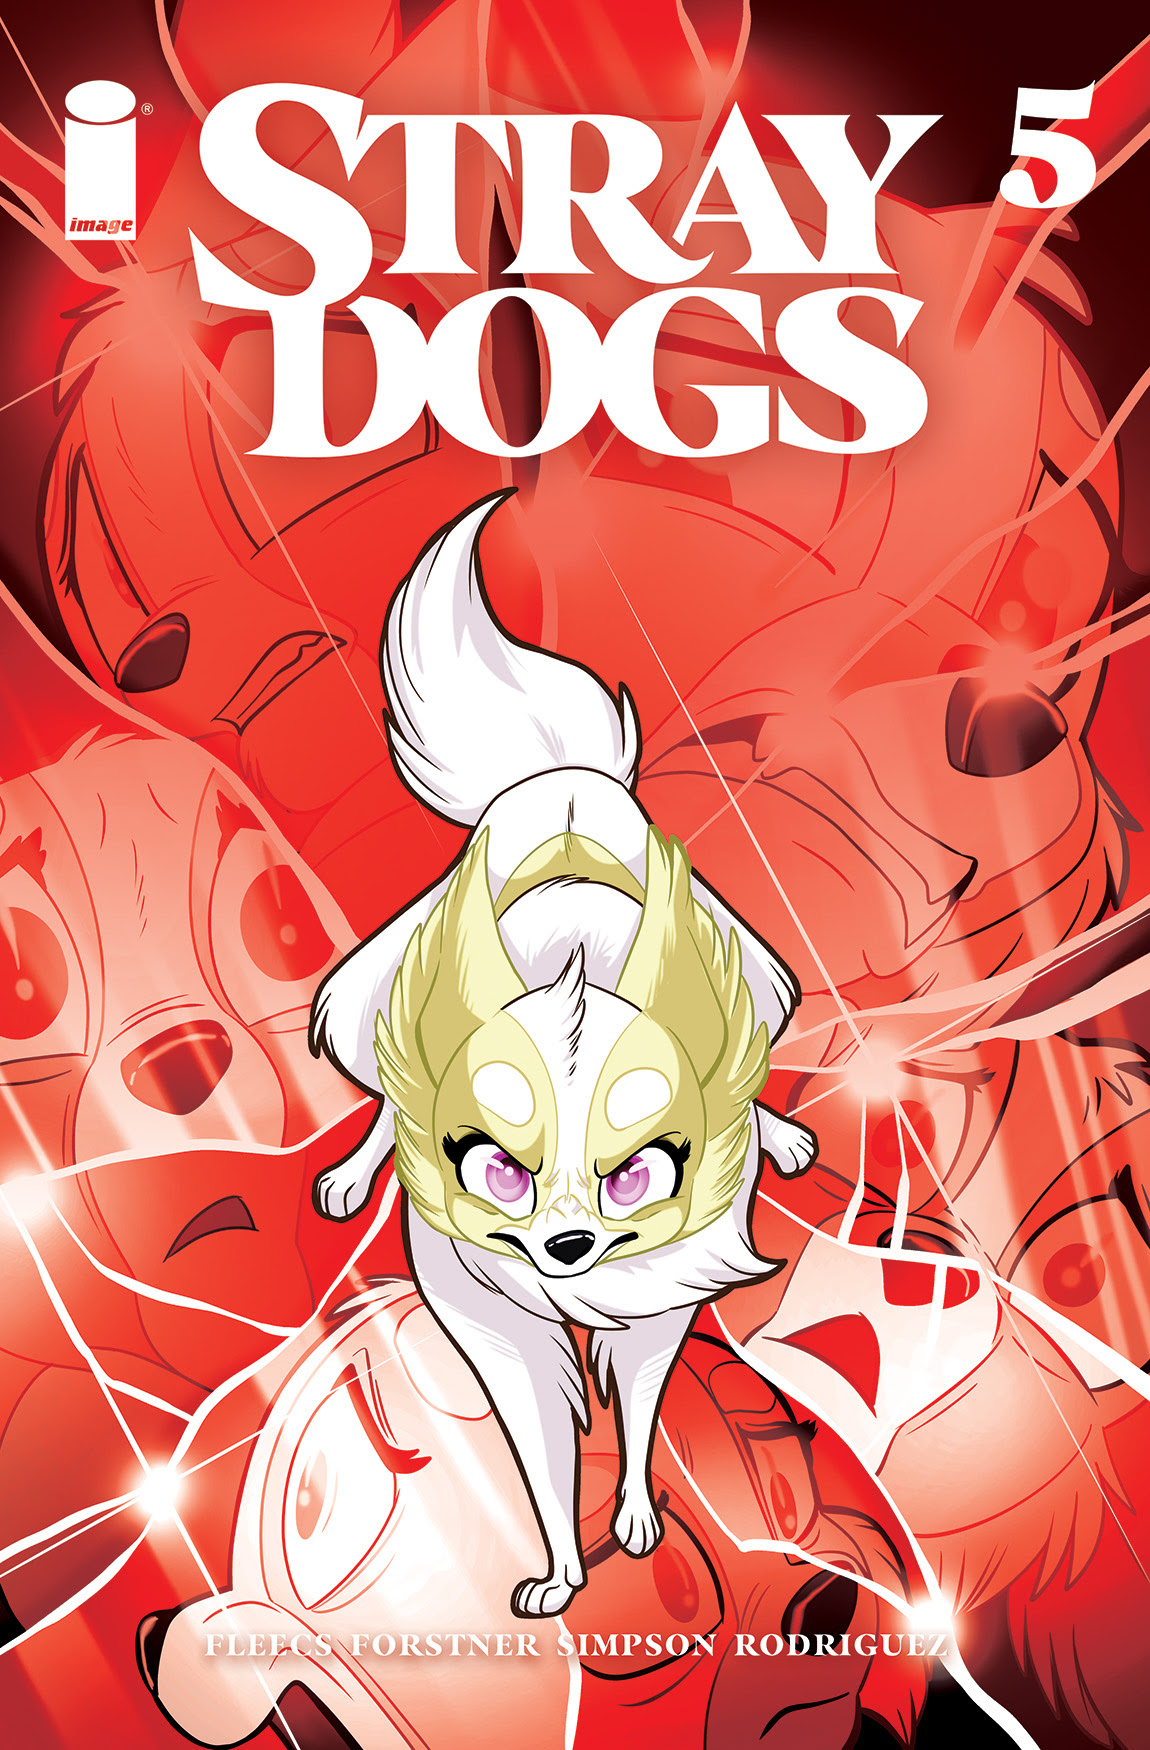 Stray Dogs #5 2nd Printing Cover A